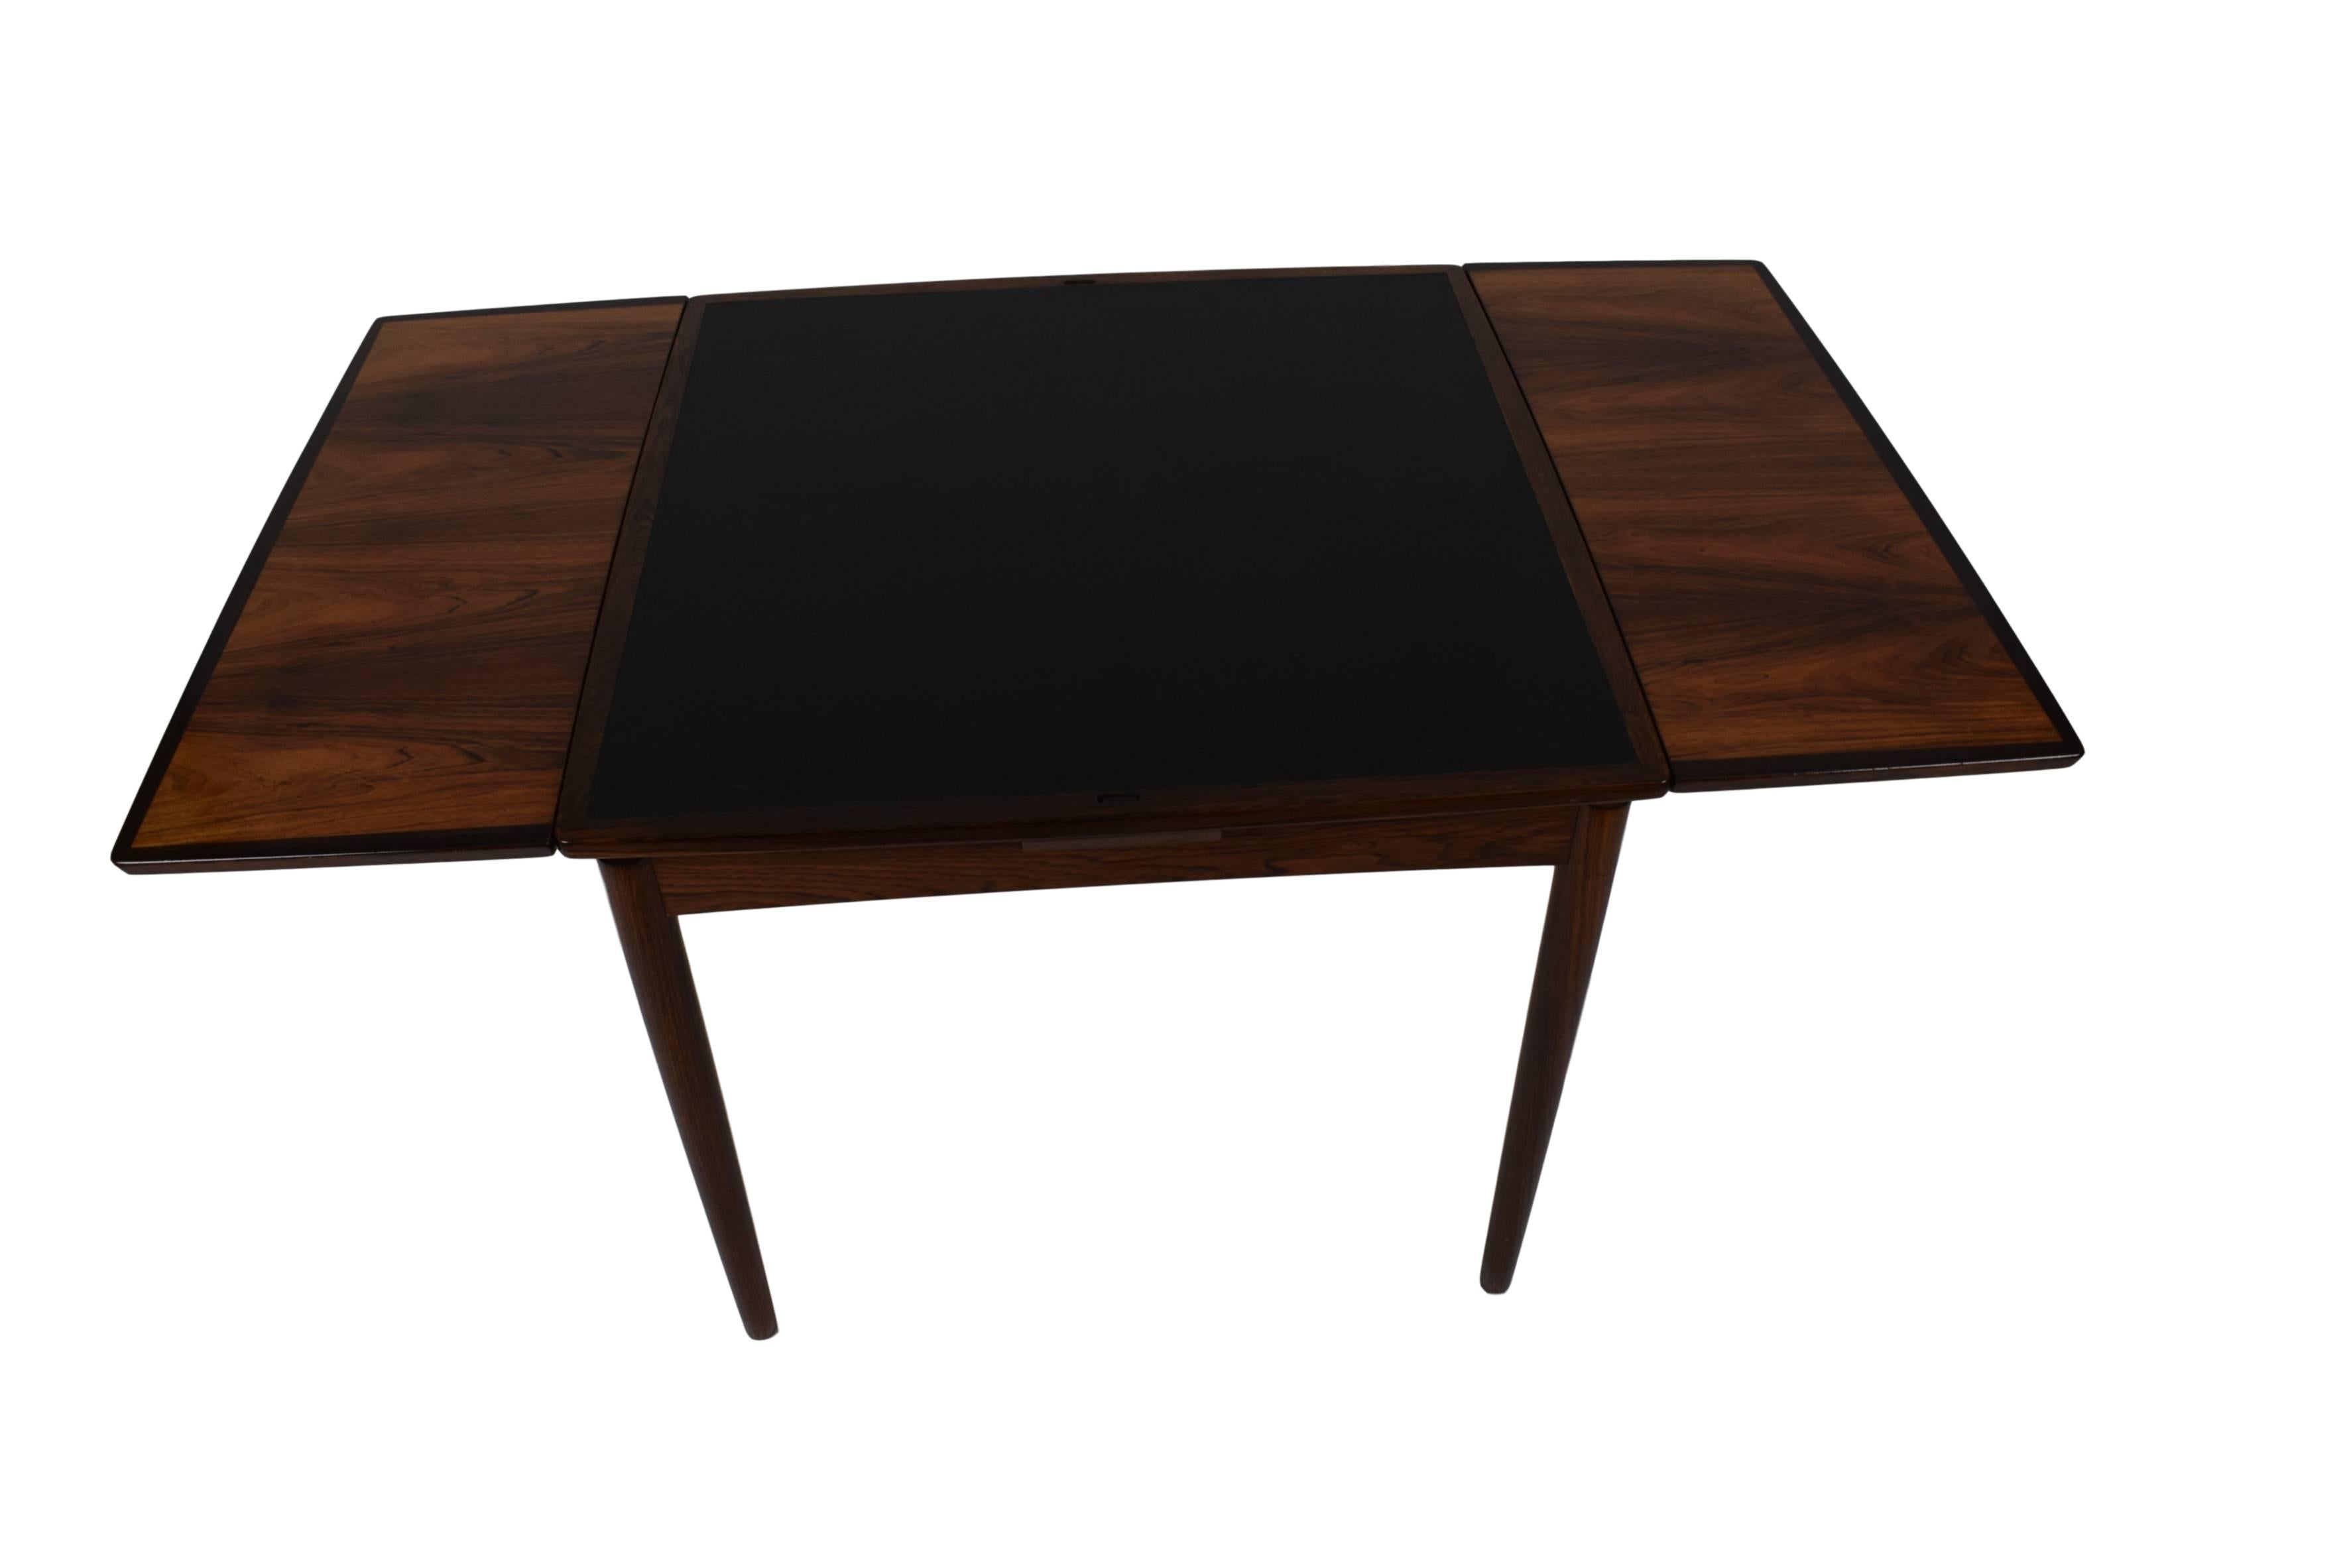 Danish Midcentury Games Table / Dining Table by Poul Hundevad, Reversible Top 1